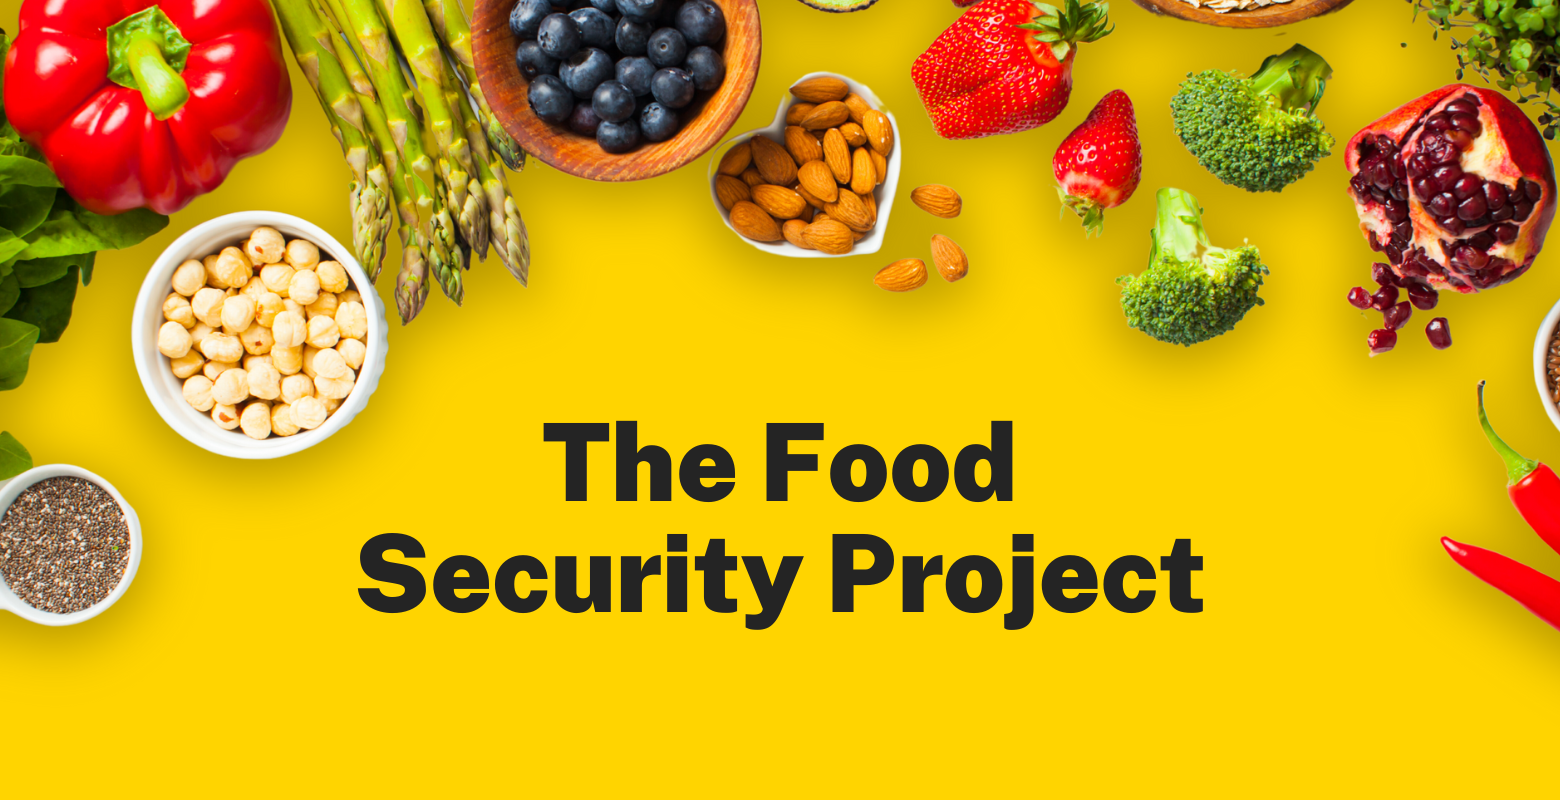 The Food Security Project